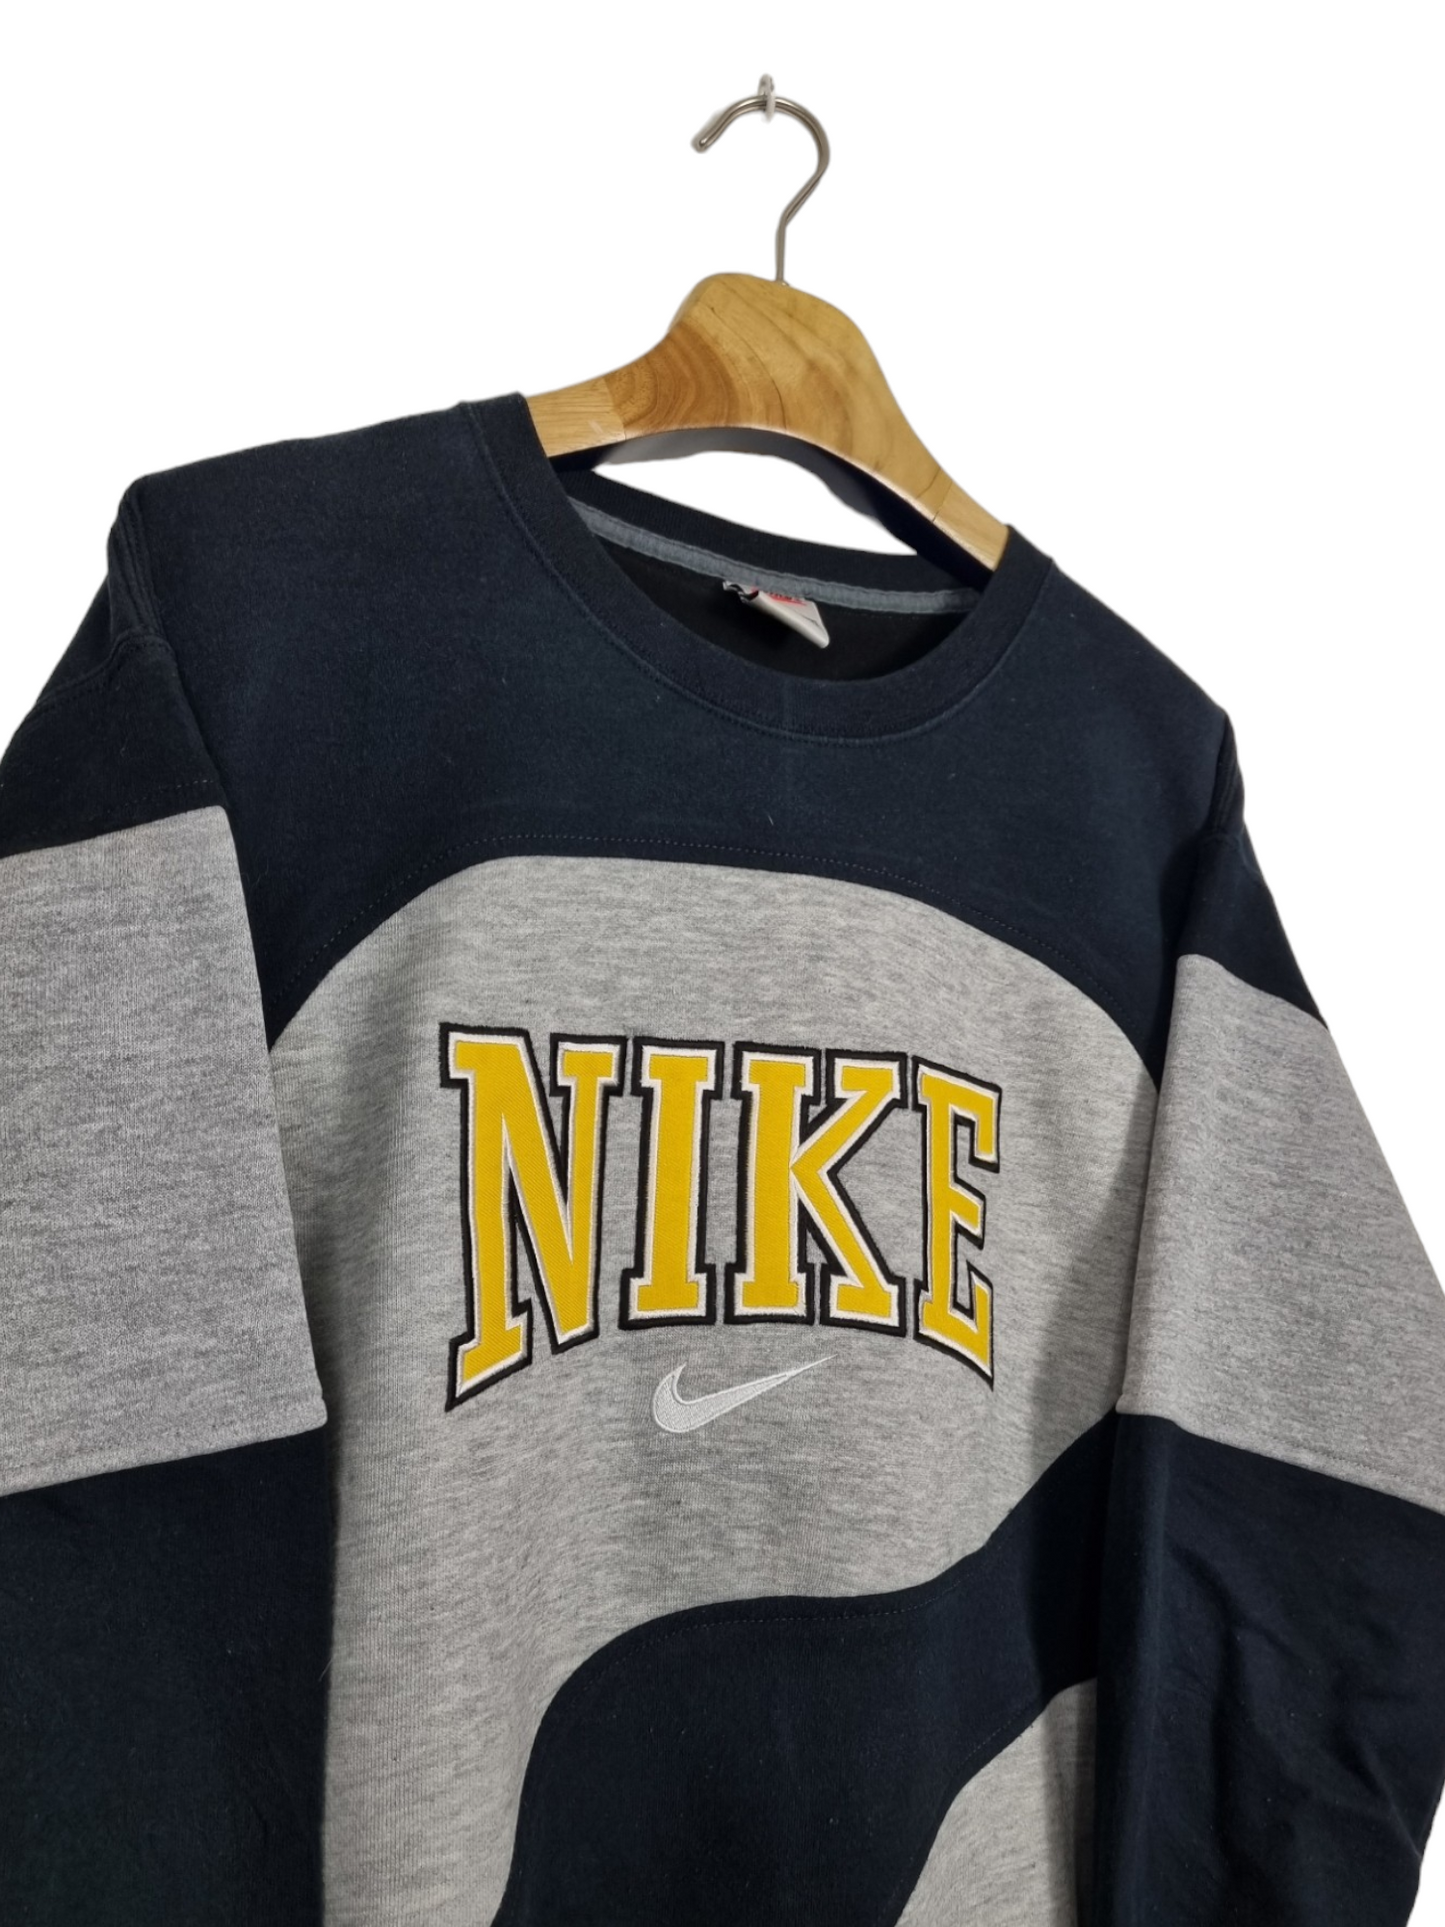 Nike 90s spell out sweater maat M